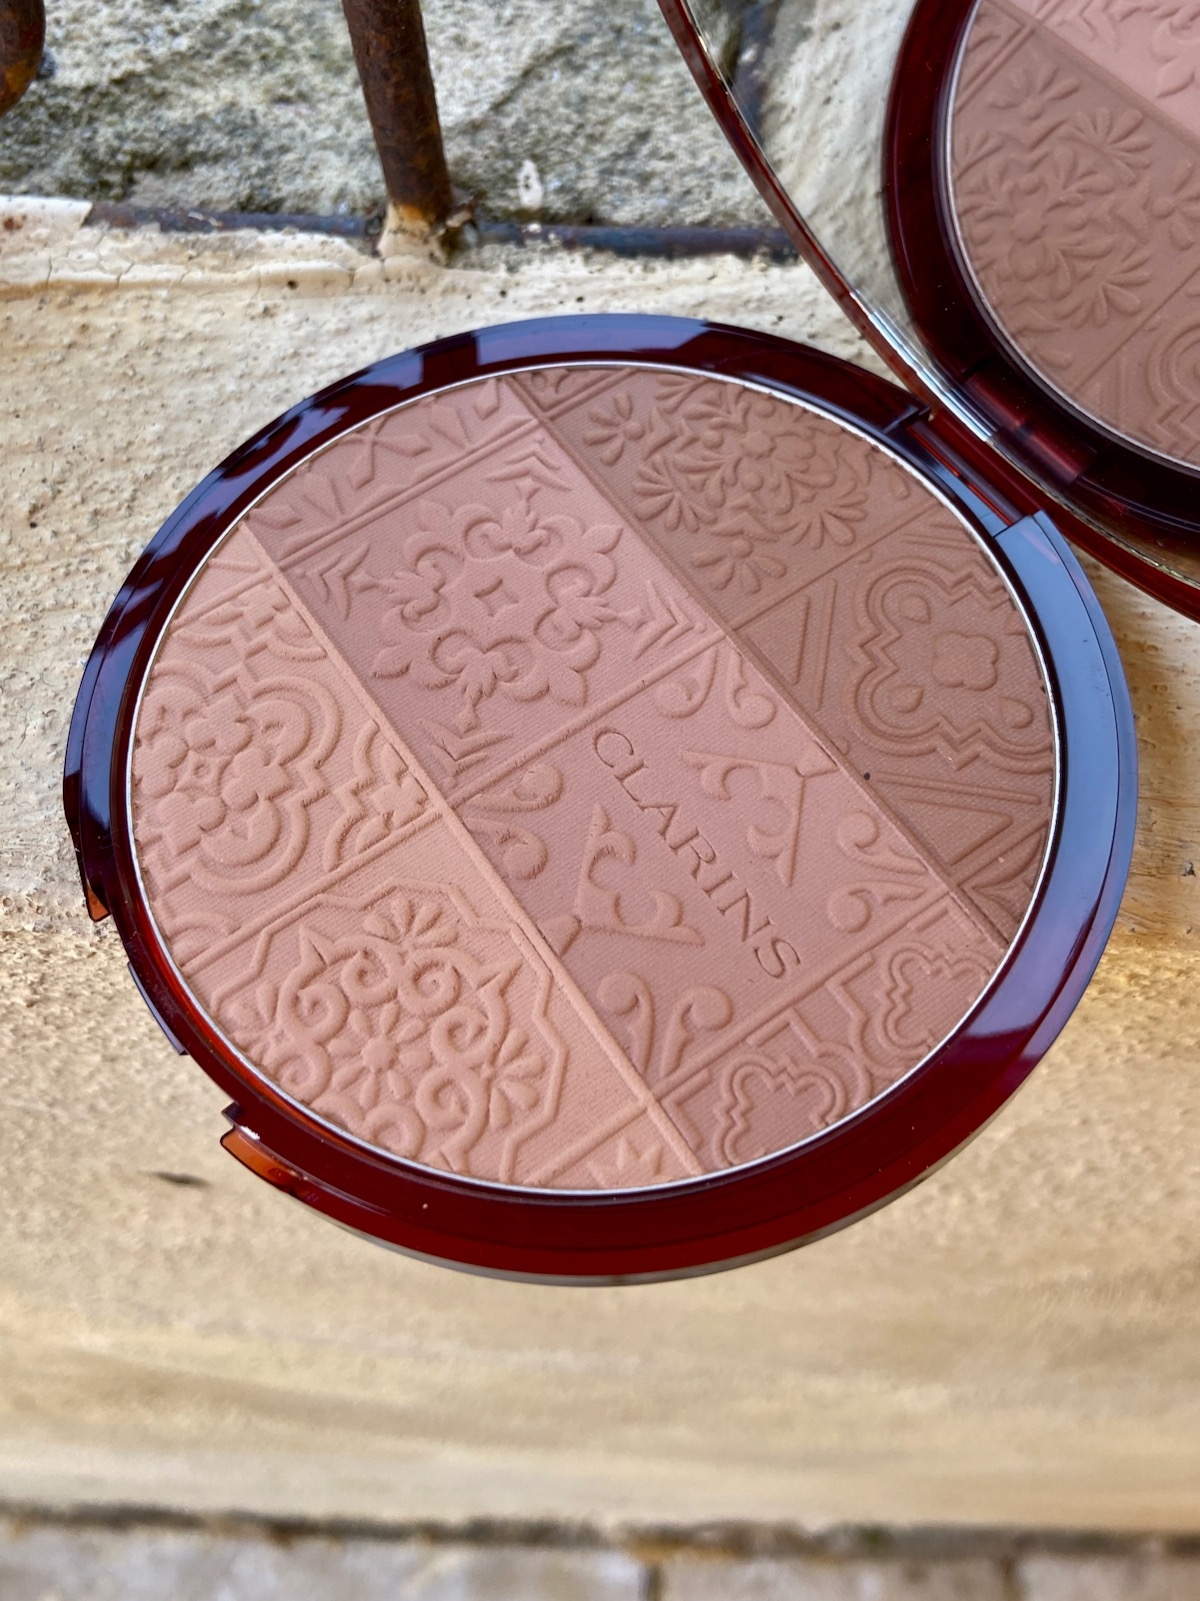 Clarins Sommer 2020 Bronzing Compact